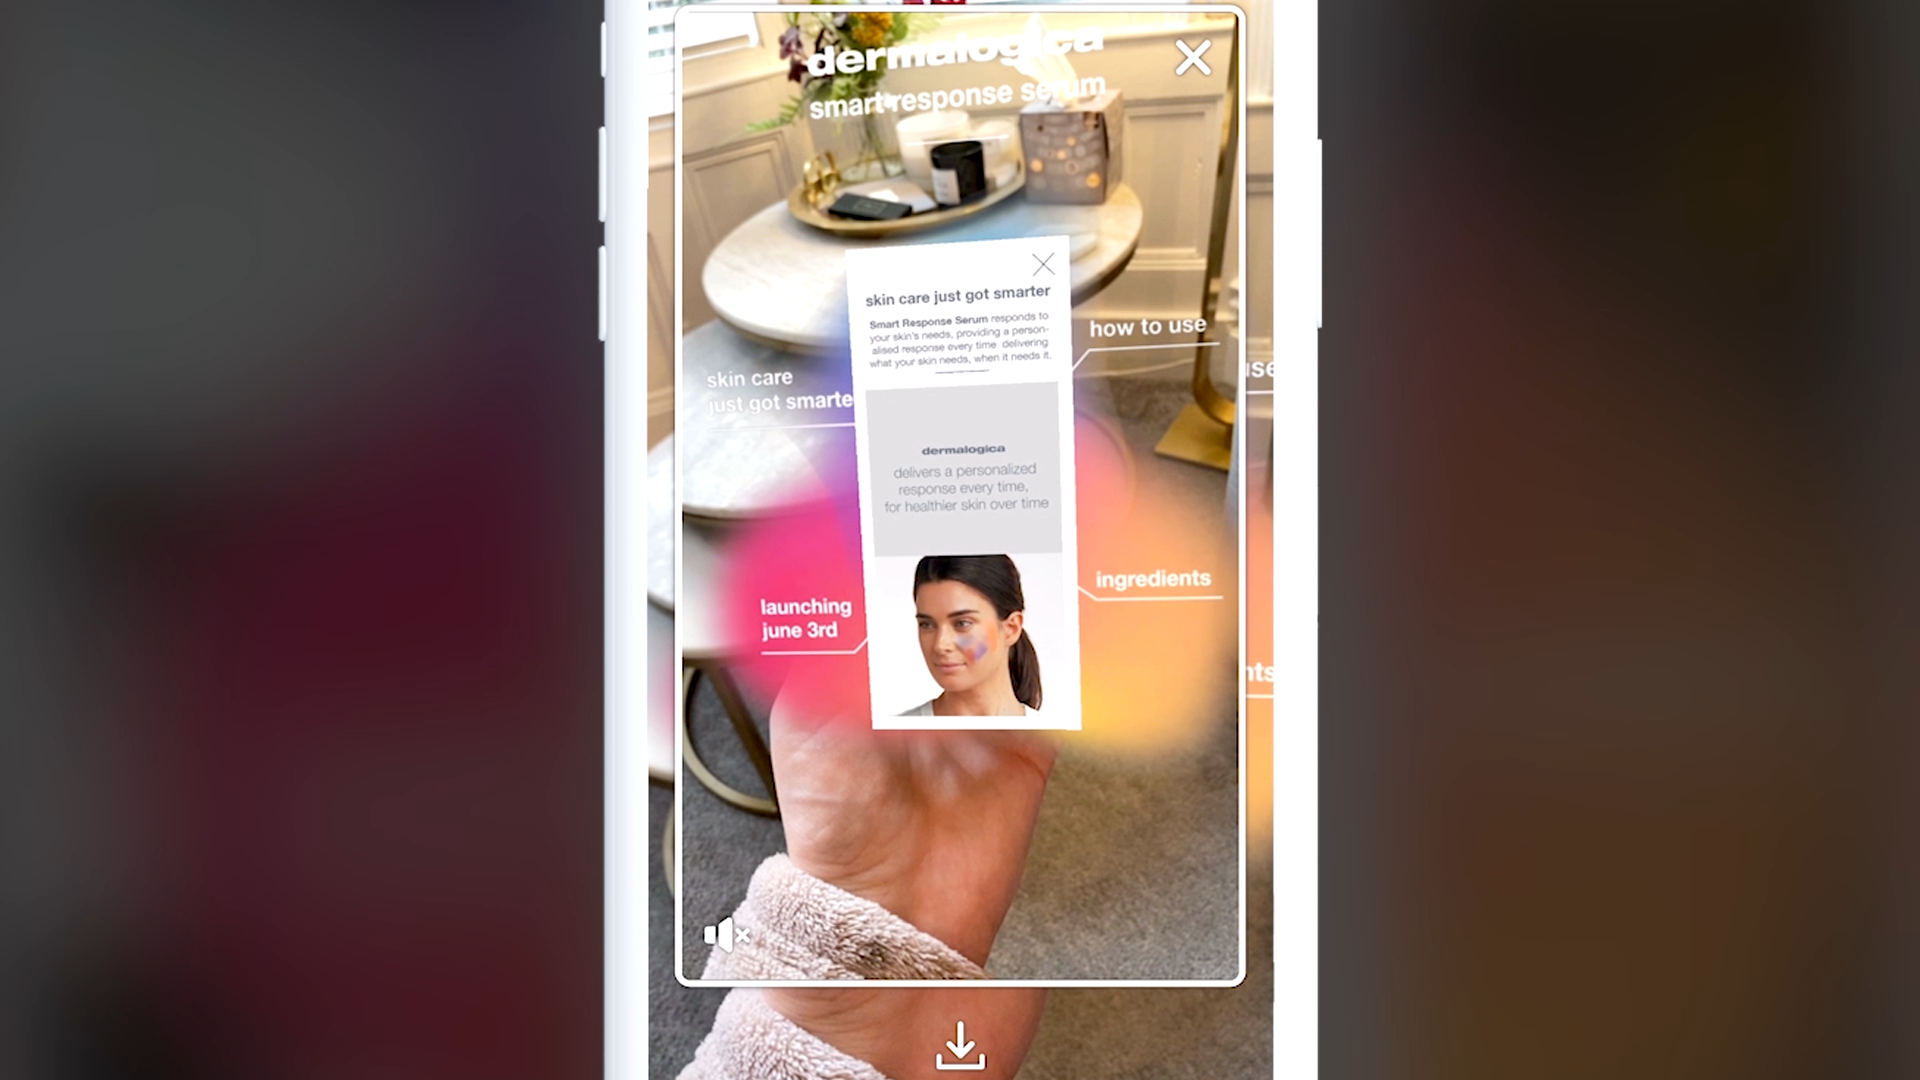 Dermalogica uses on-packaging WebAR experience to educate customers on new product range